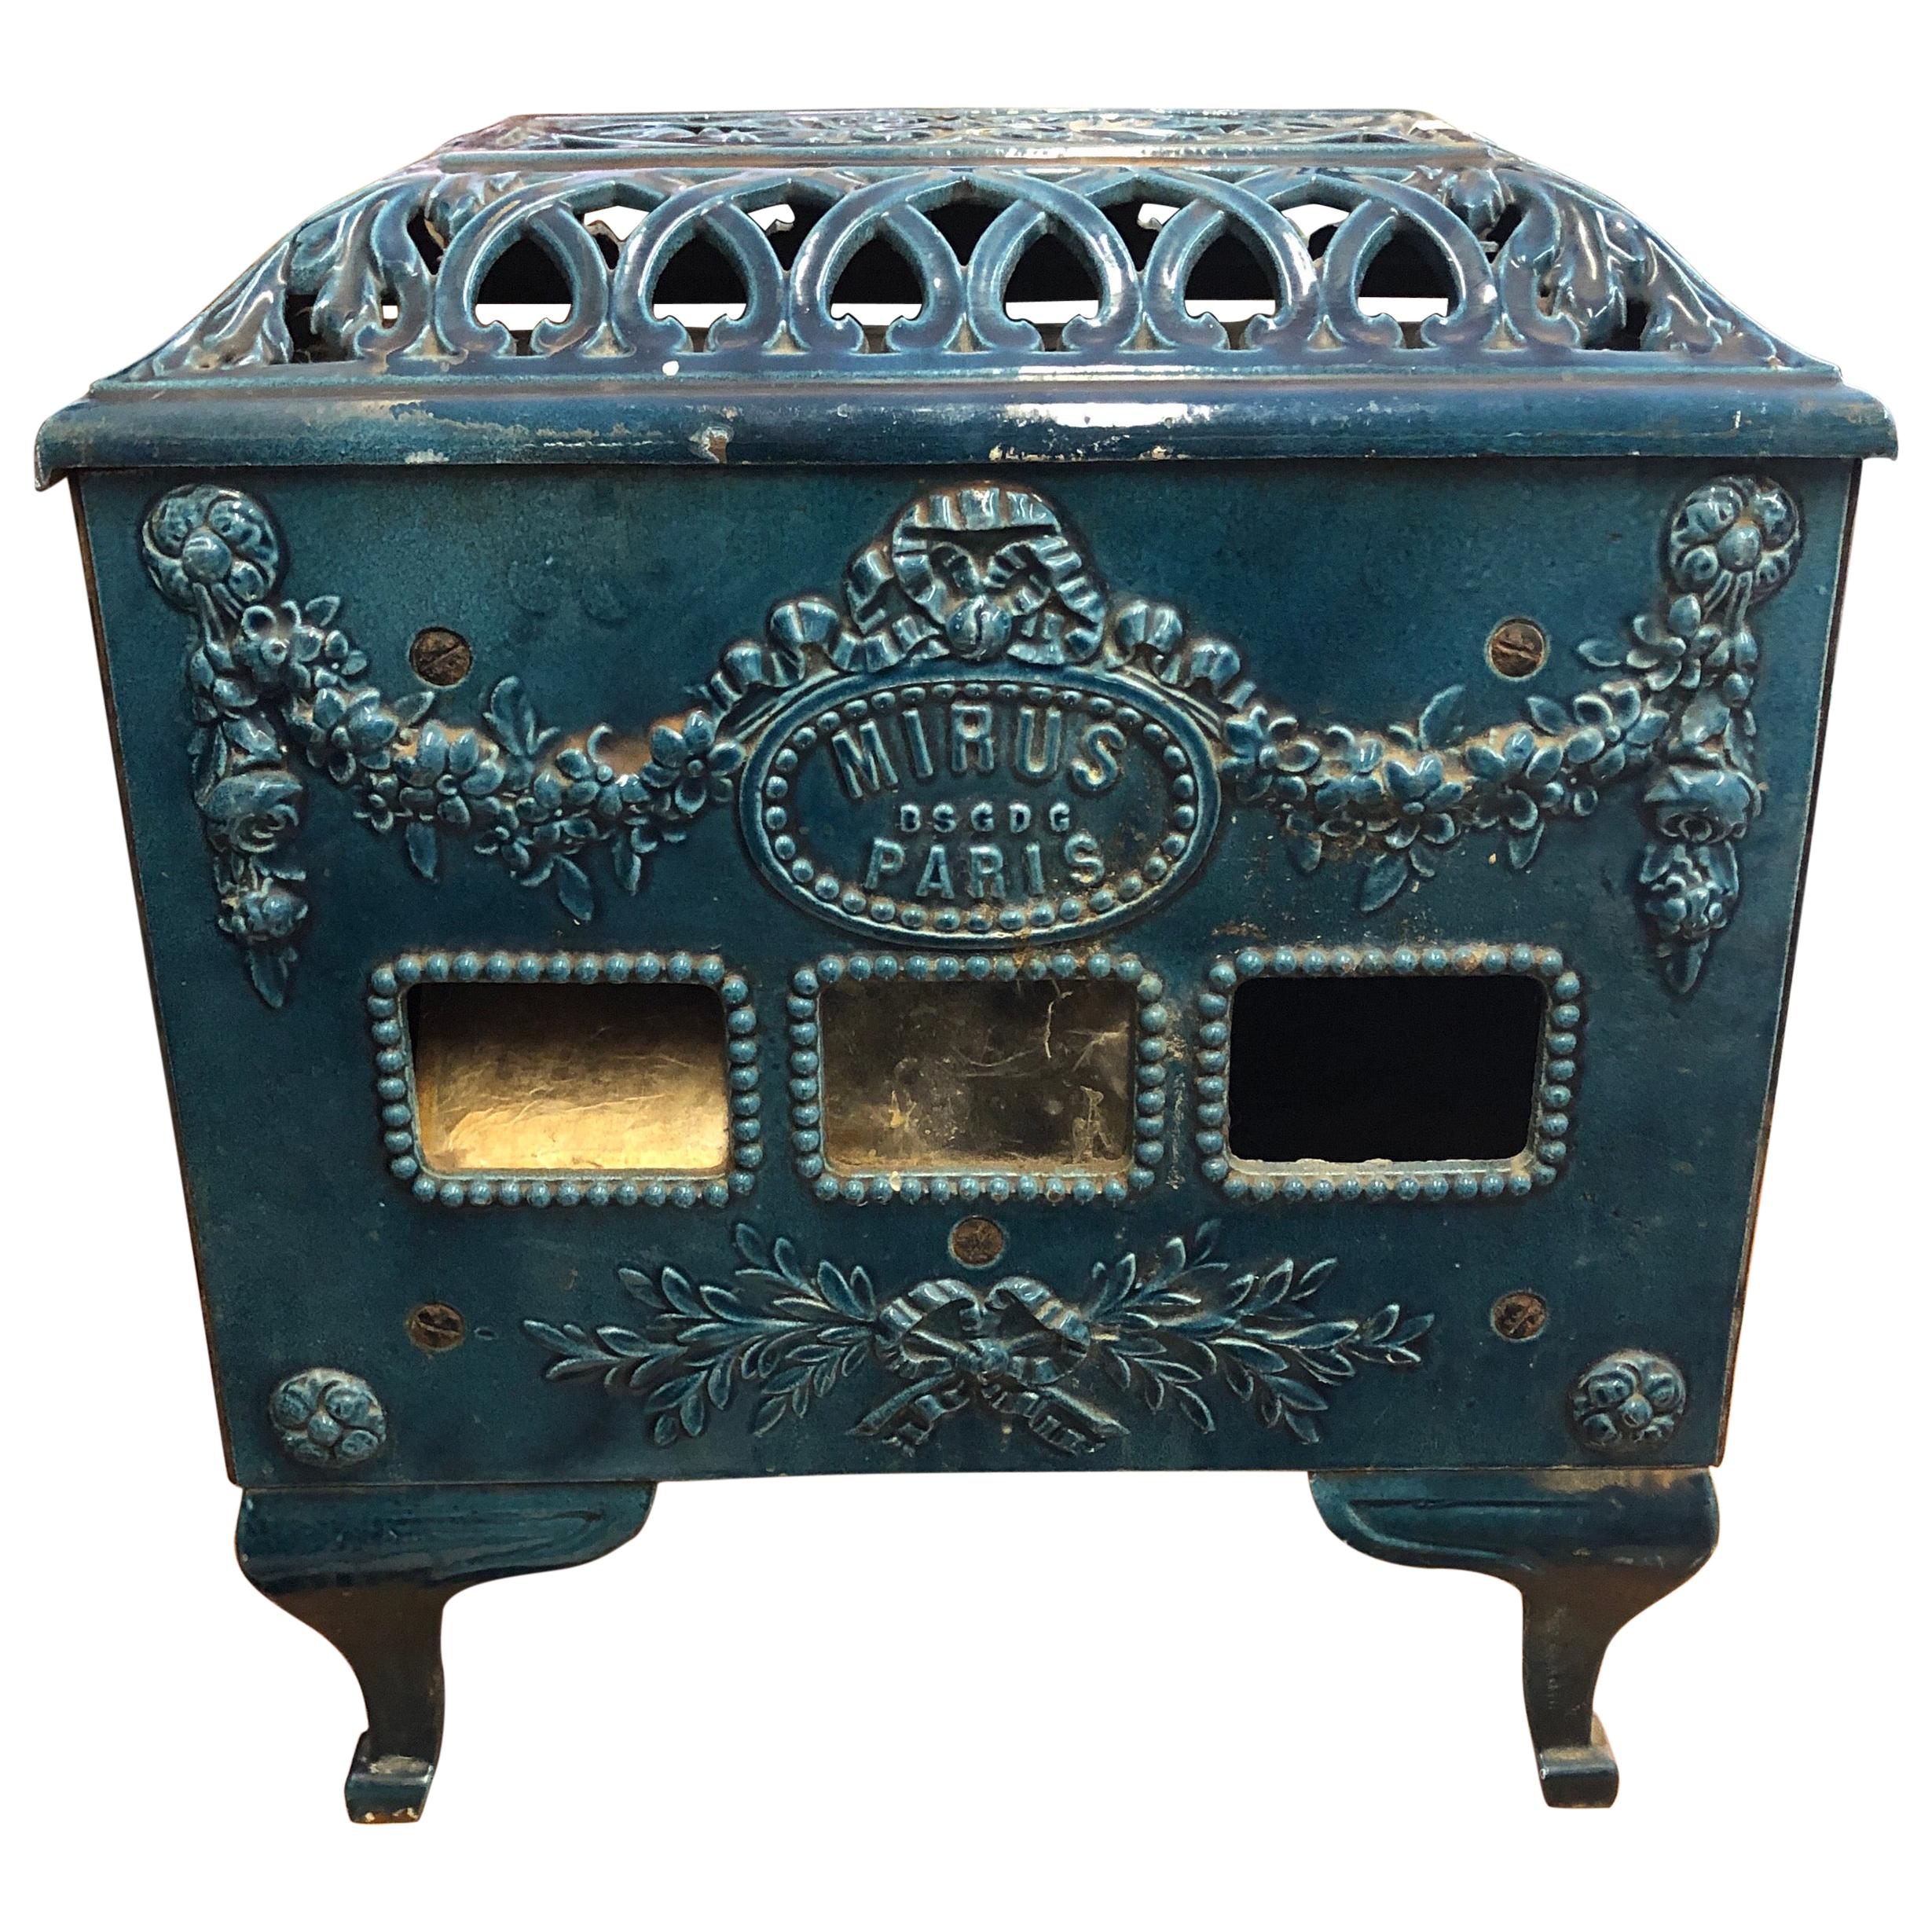 20th Century French Mirus Wood Stove in Blue Ceramic and Great Decoration